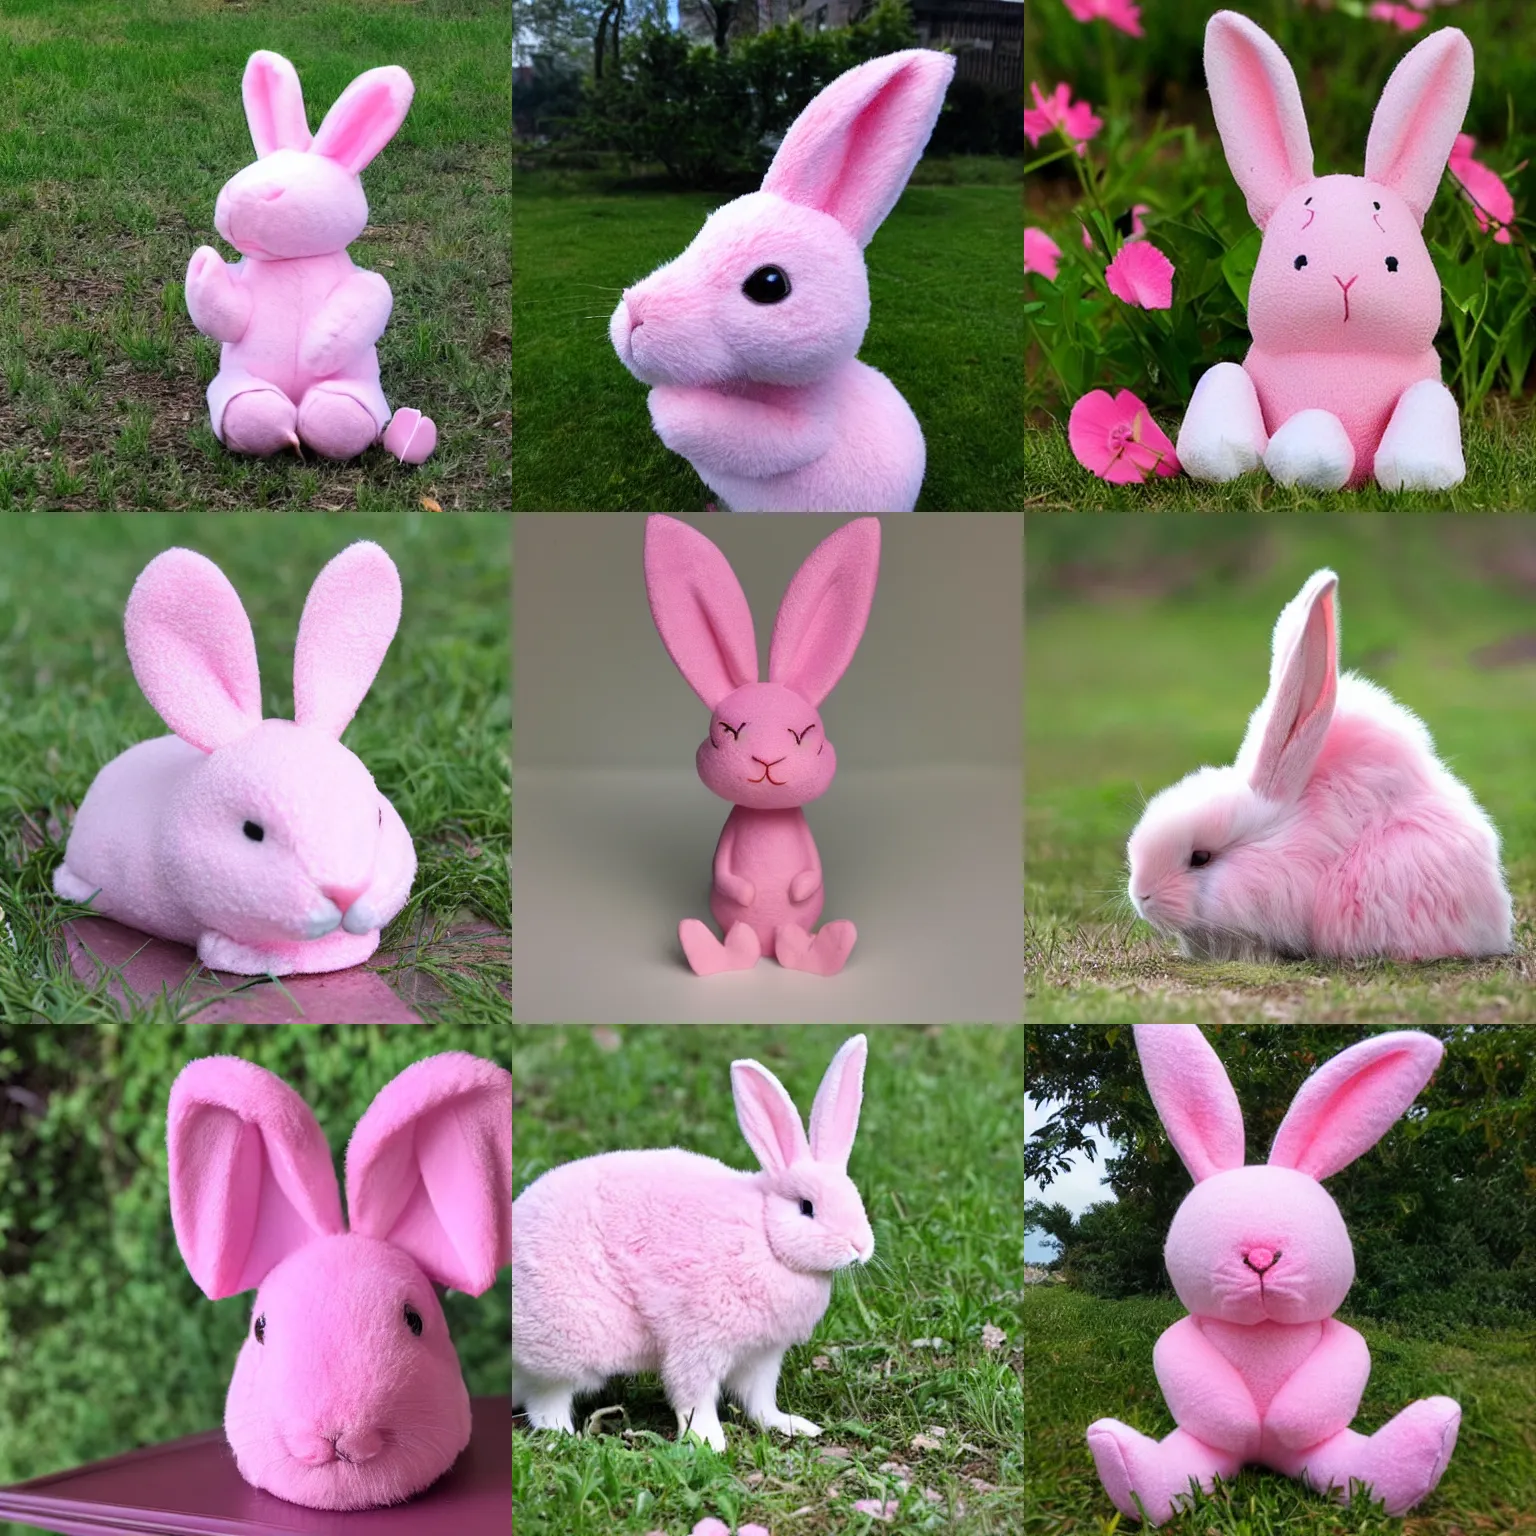 a sweet pink rabbit with large ears | Stable Diffusion